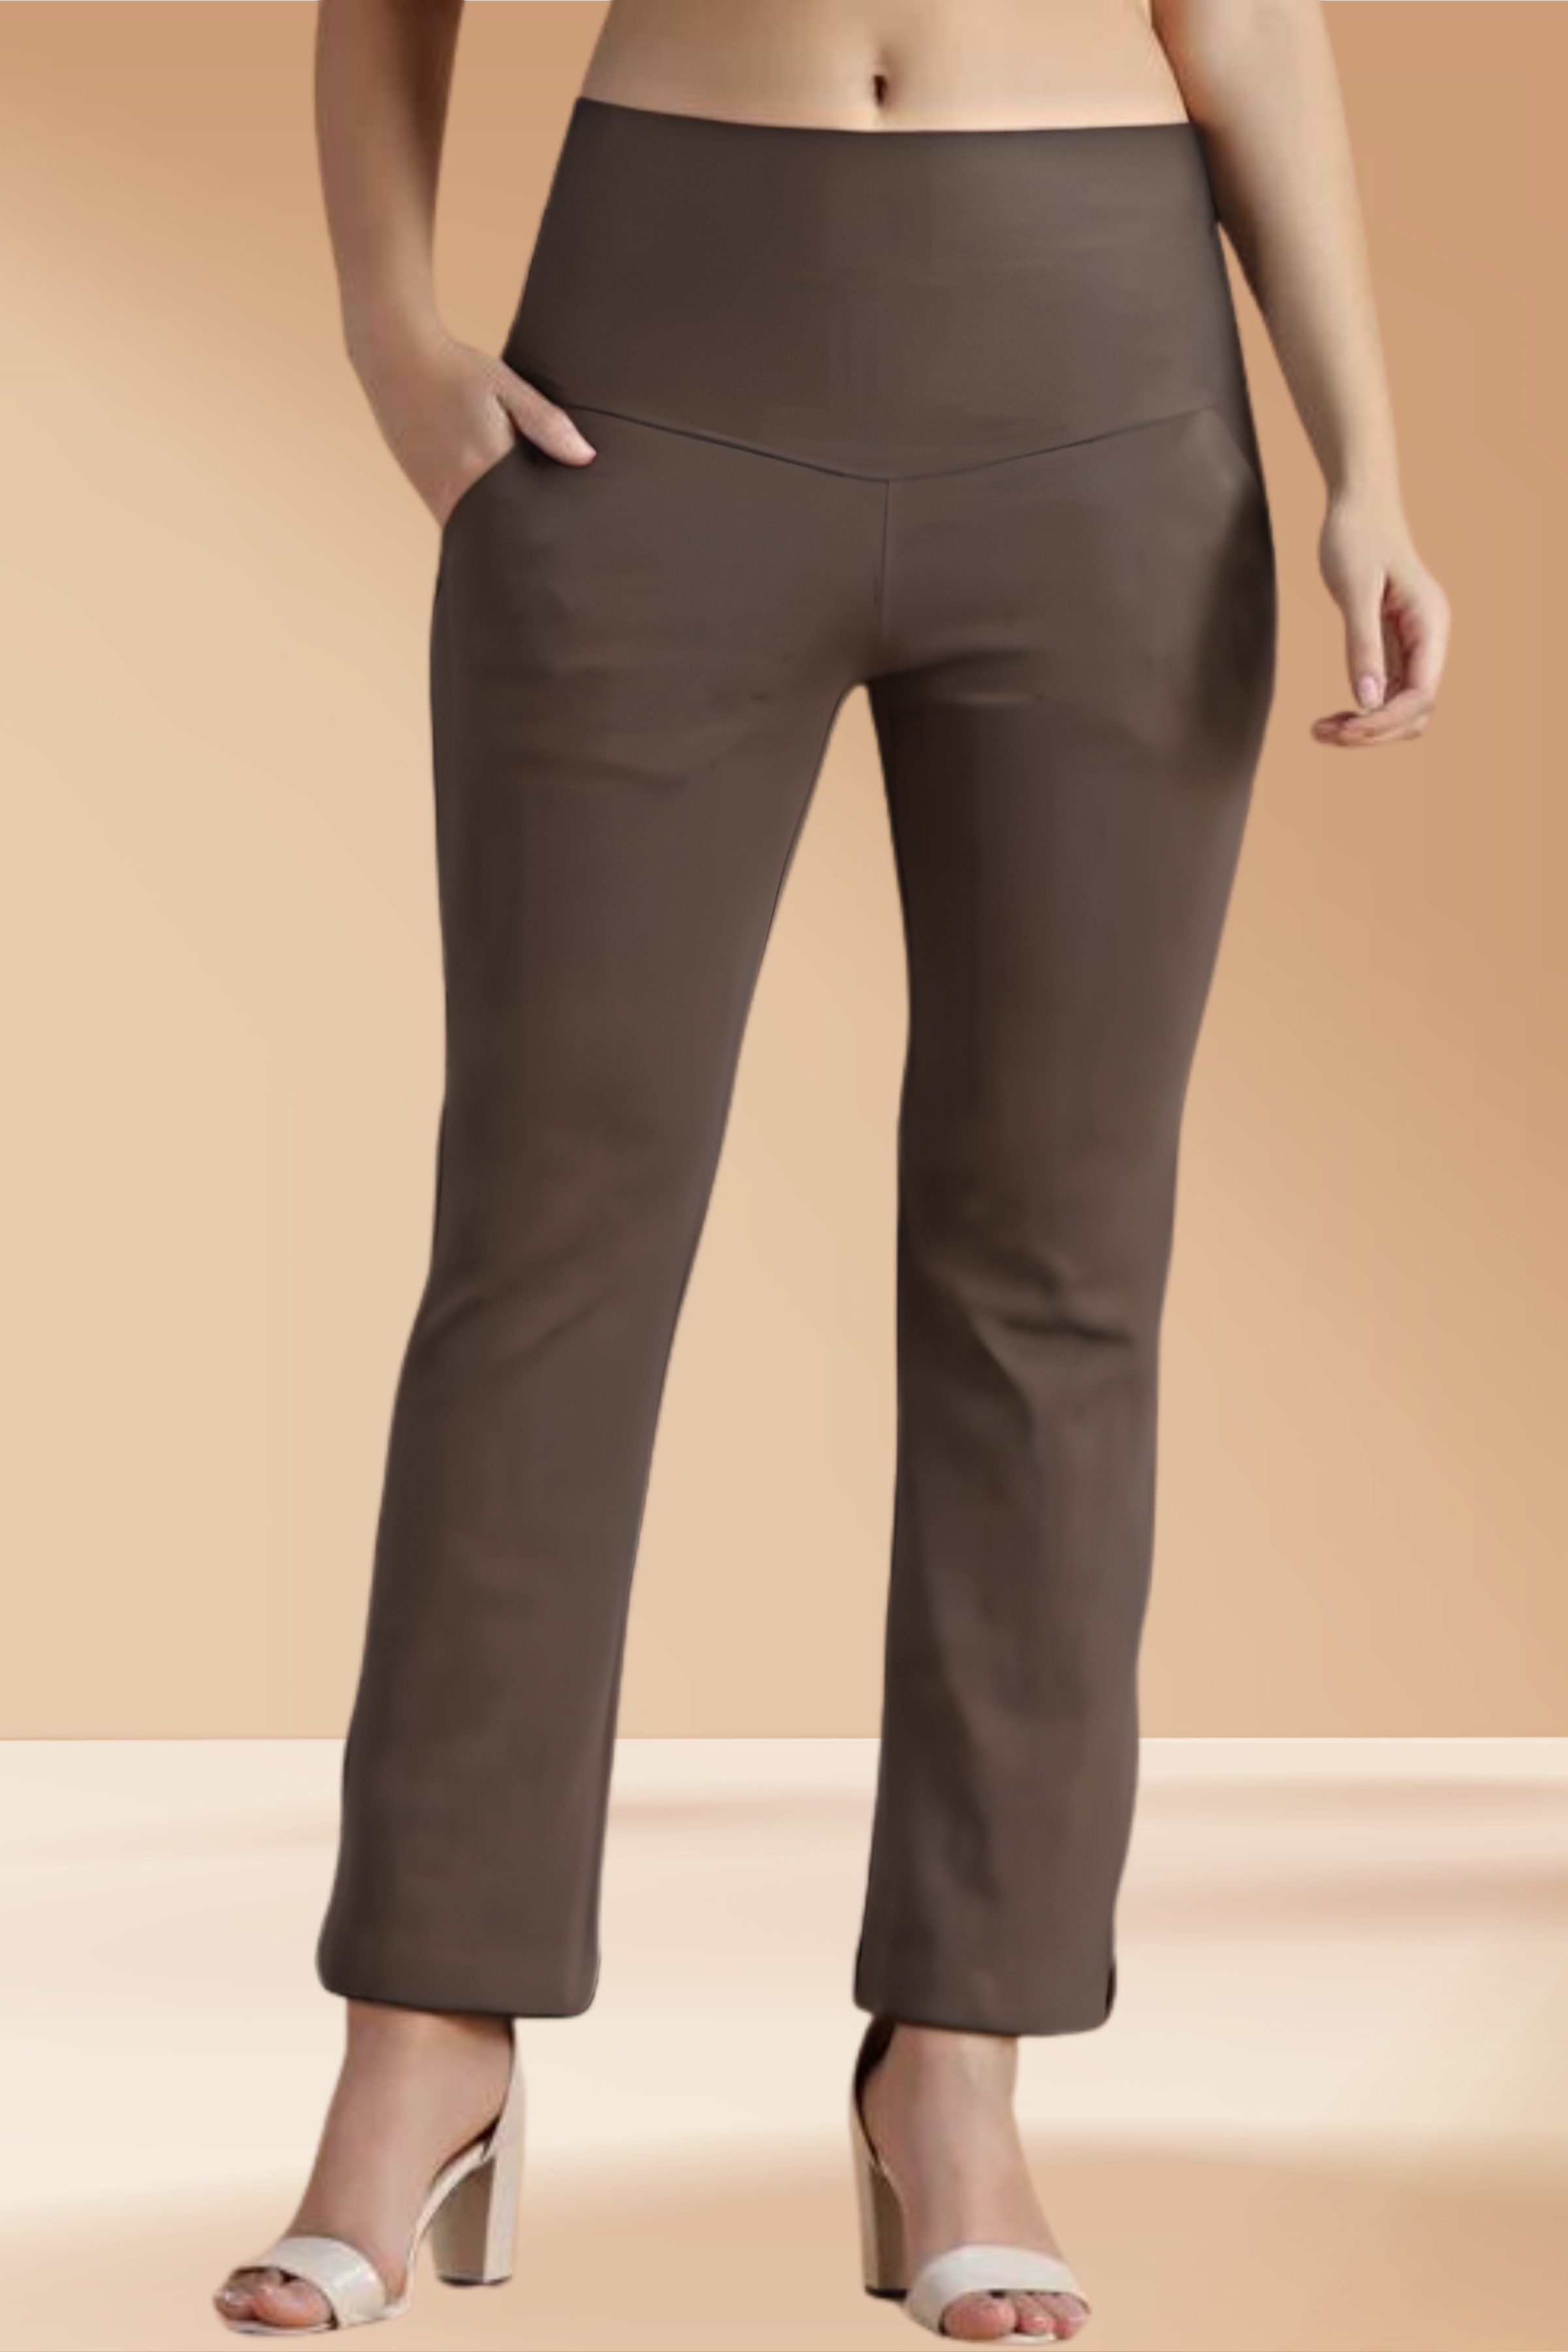 What to Wear With Brown Pants Female? [Updated January 2021]